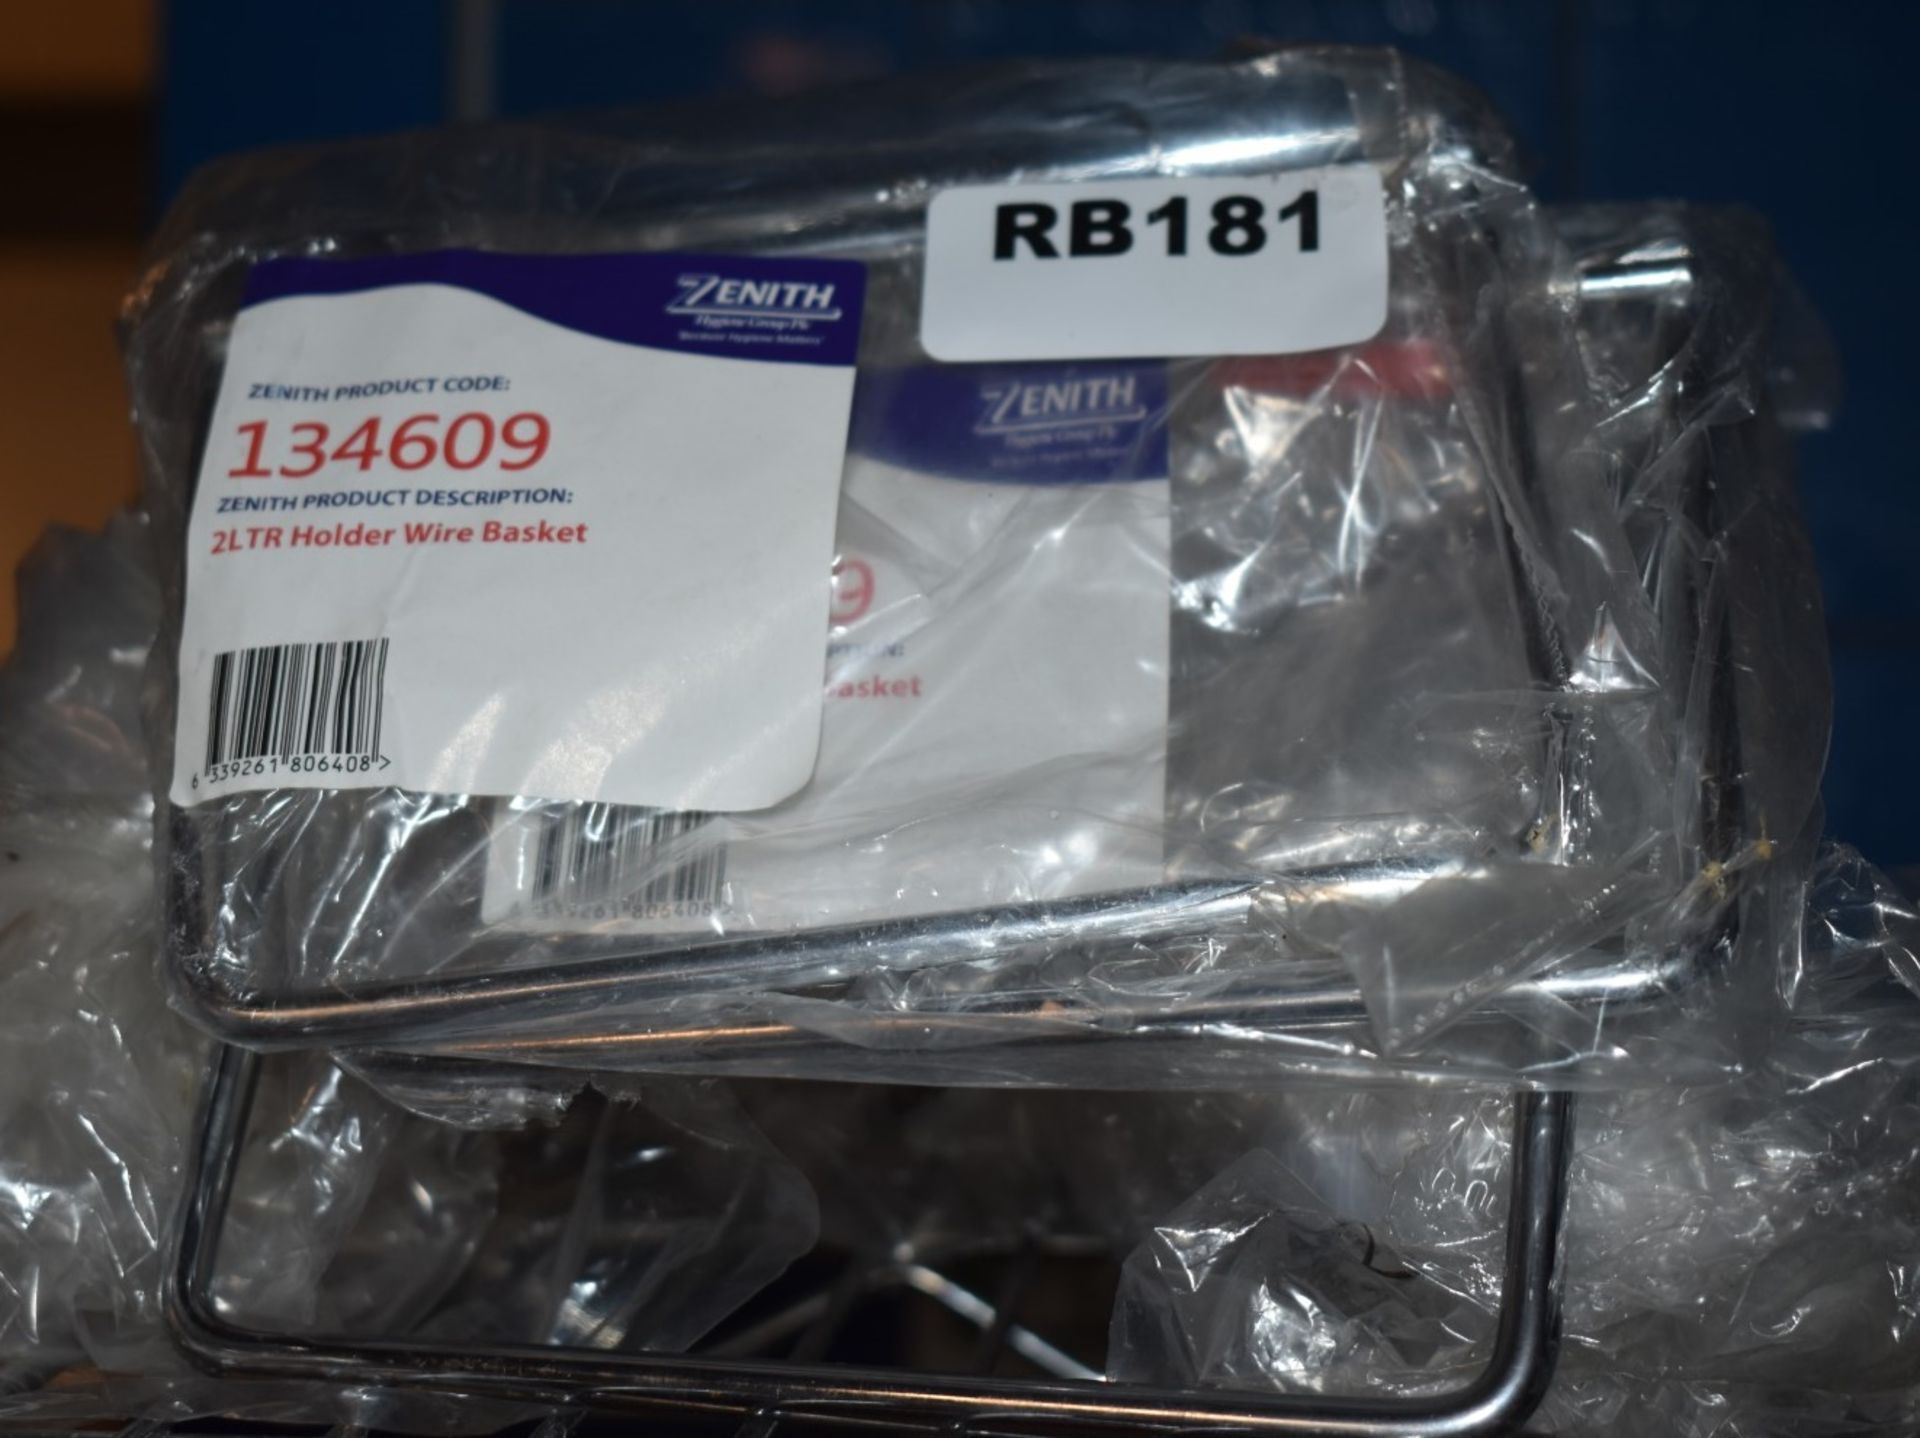 3 x Zenith 2l Holder Wire Baskets - Product Code 134609 - New in Packets - Ref: RB181 - CL558 -